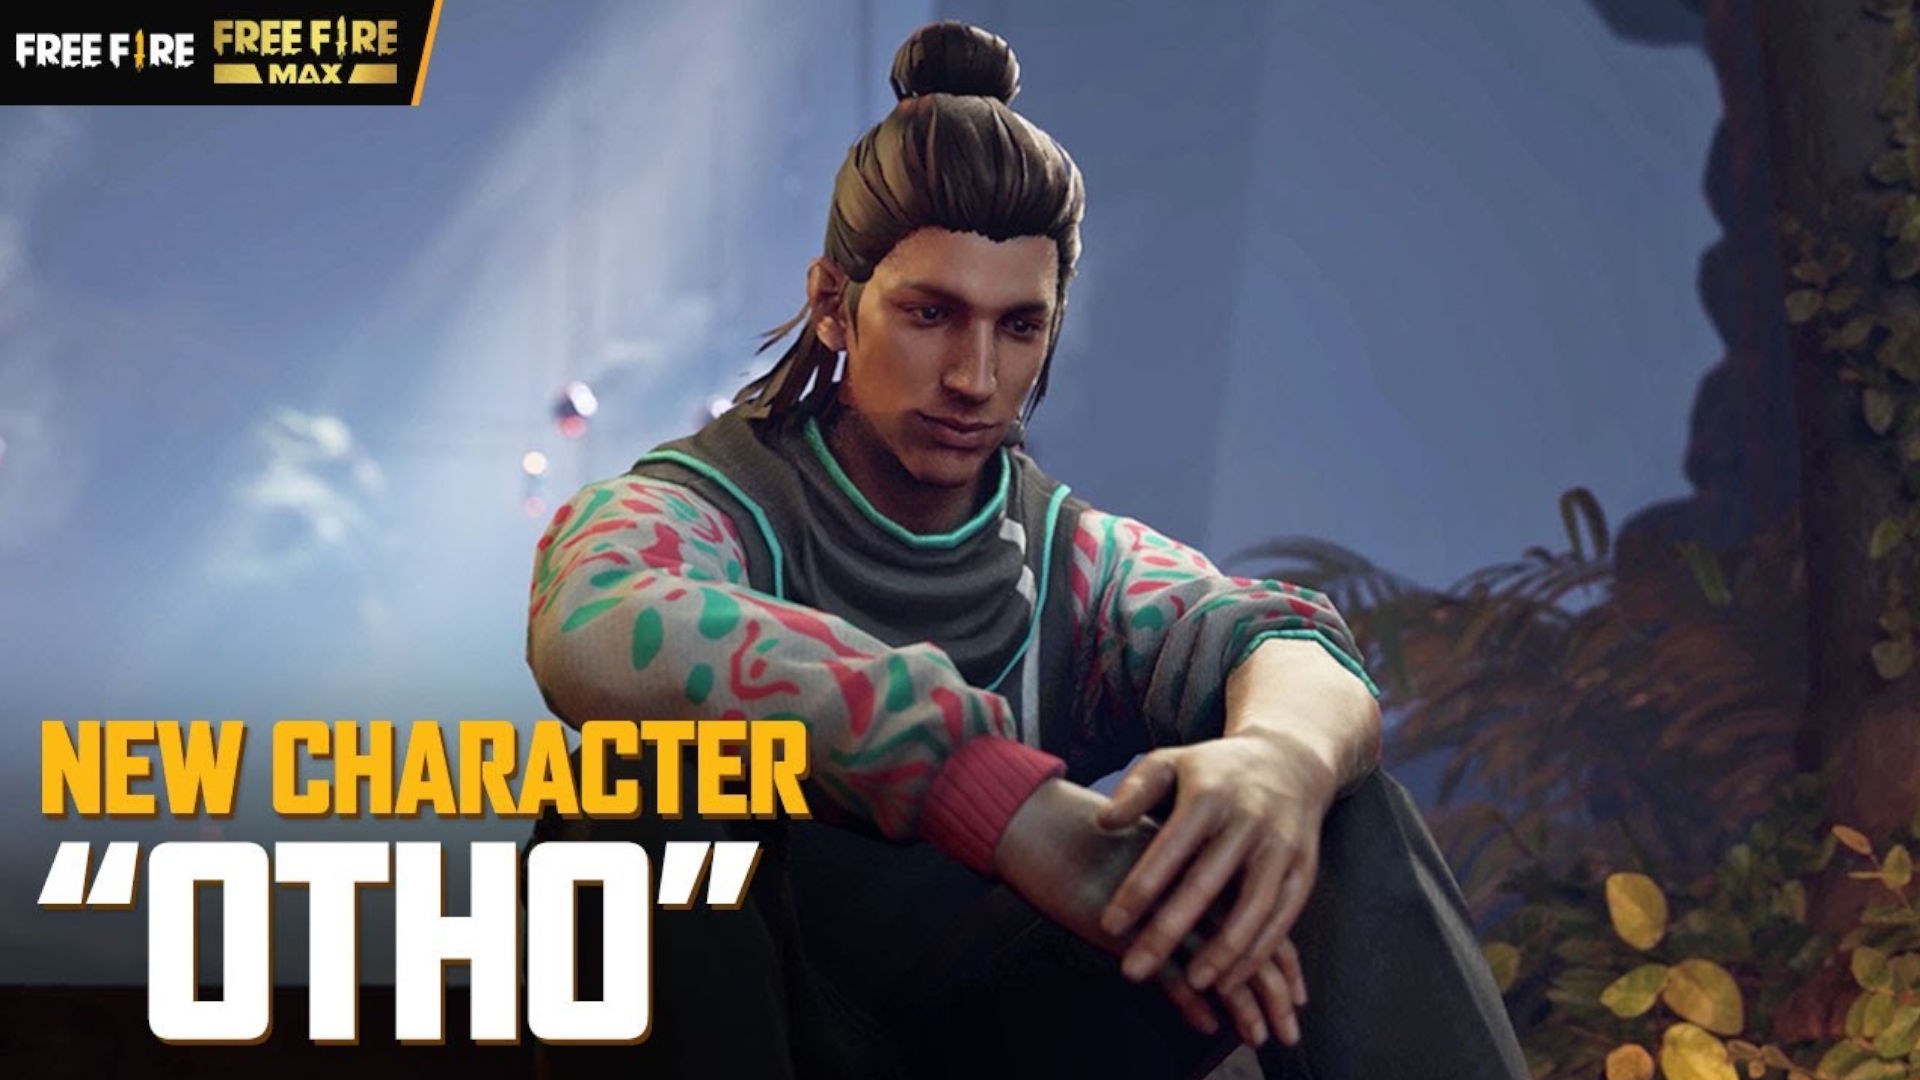 5 Best Characters in Free Fire Game- Updated for 2021